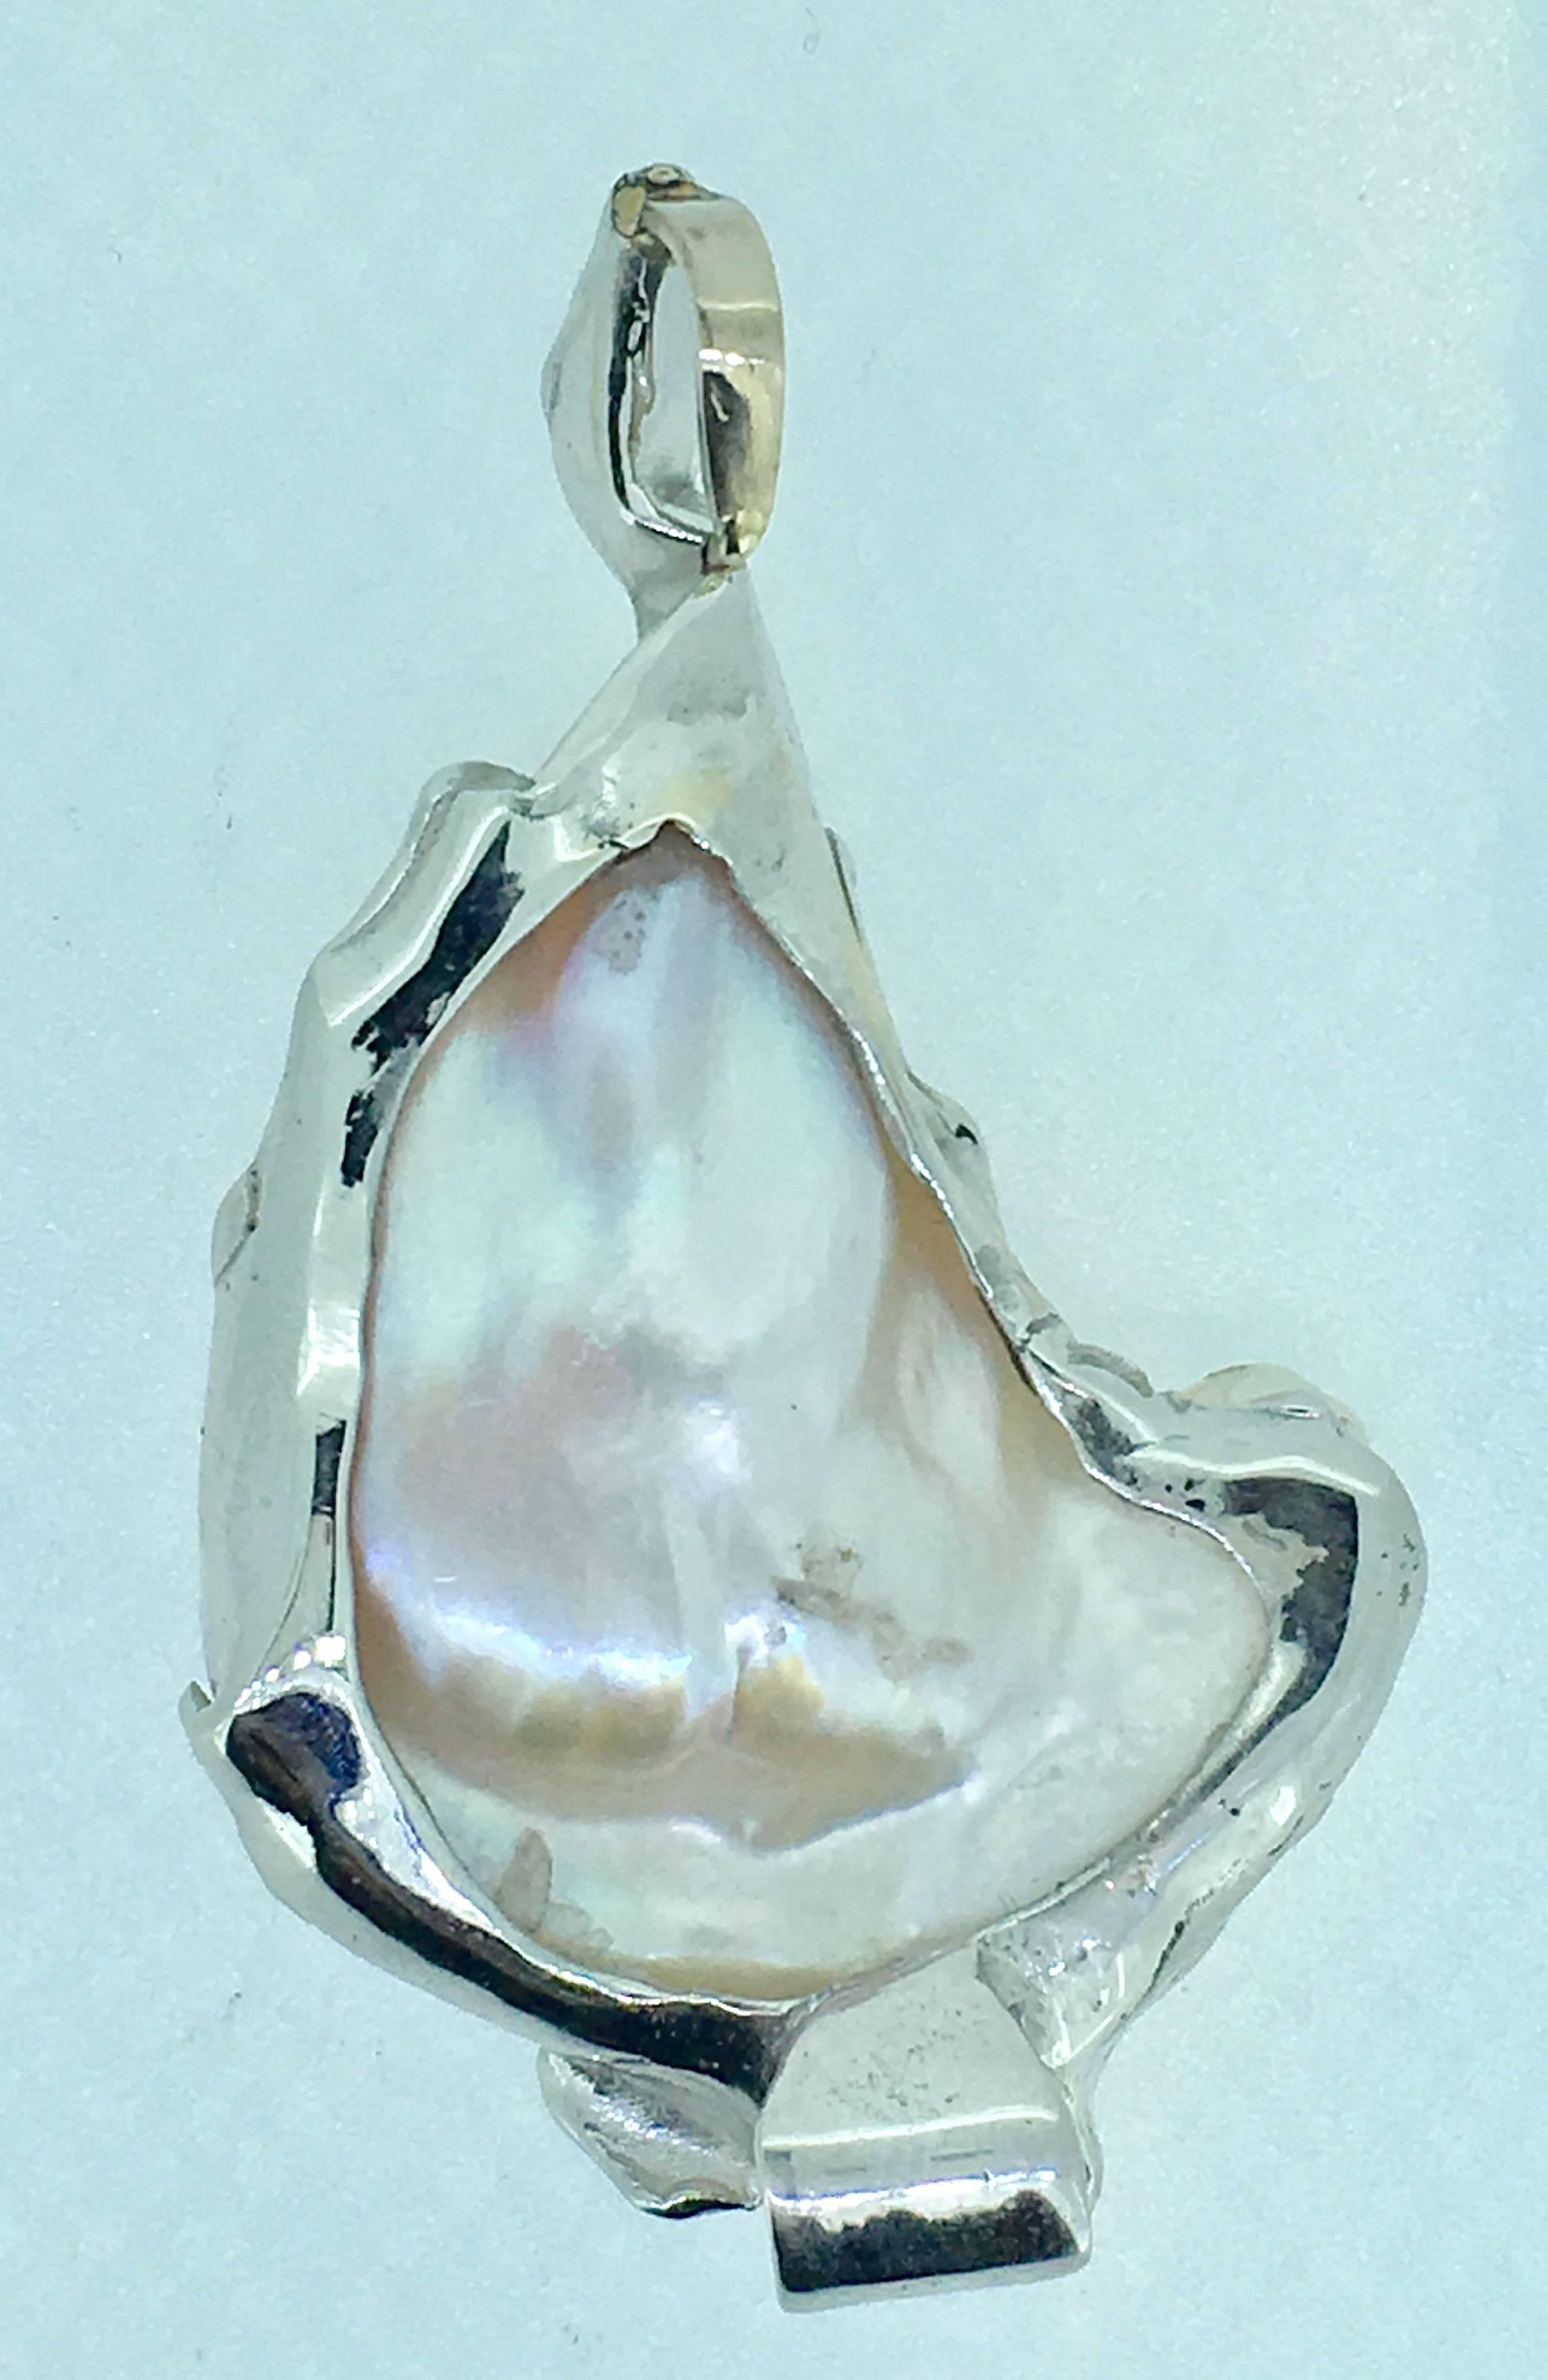 Gorgeous one of a kind pendentif signed SVG .
This piece was made by L. Van Giel with a Baroque white pearl and a total of 11 diamonds of 0.15ct.
The Pearl is South sea salt water one.
and the pendentif weight 11.2 gr.

